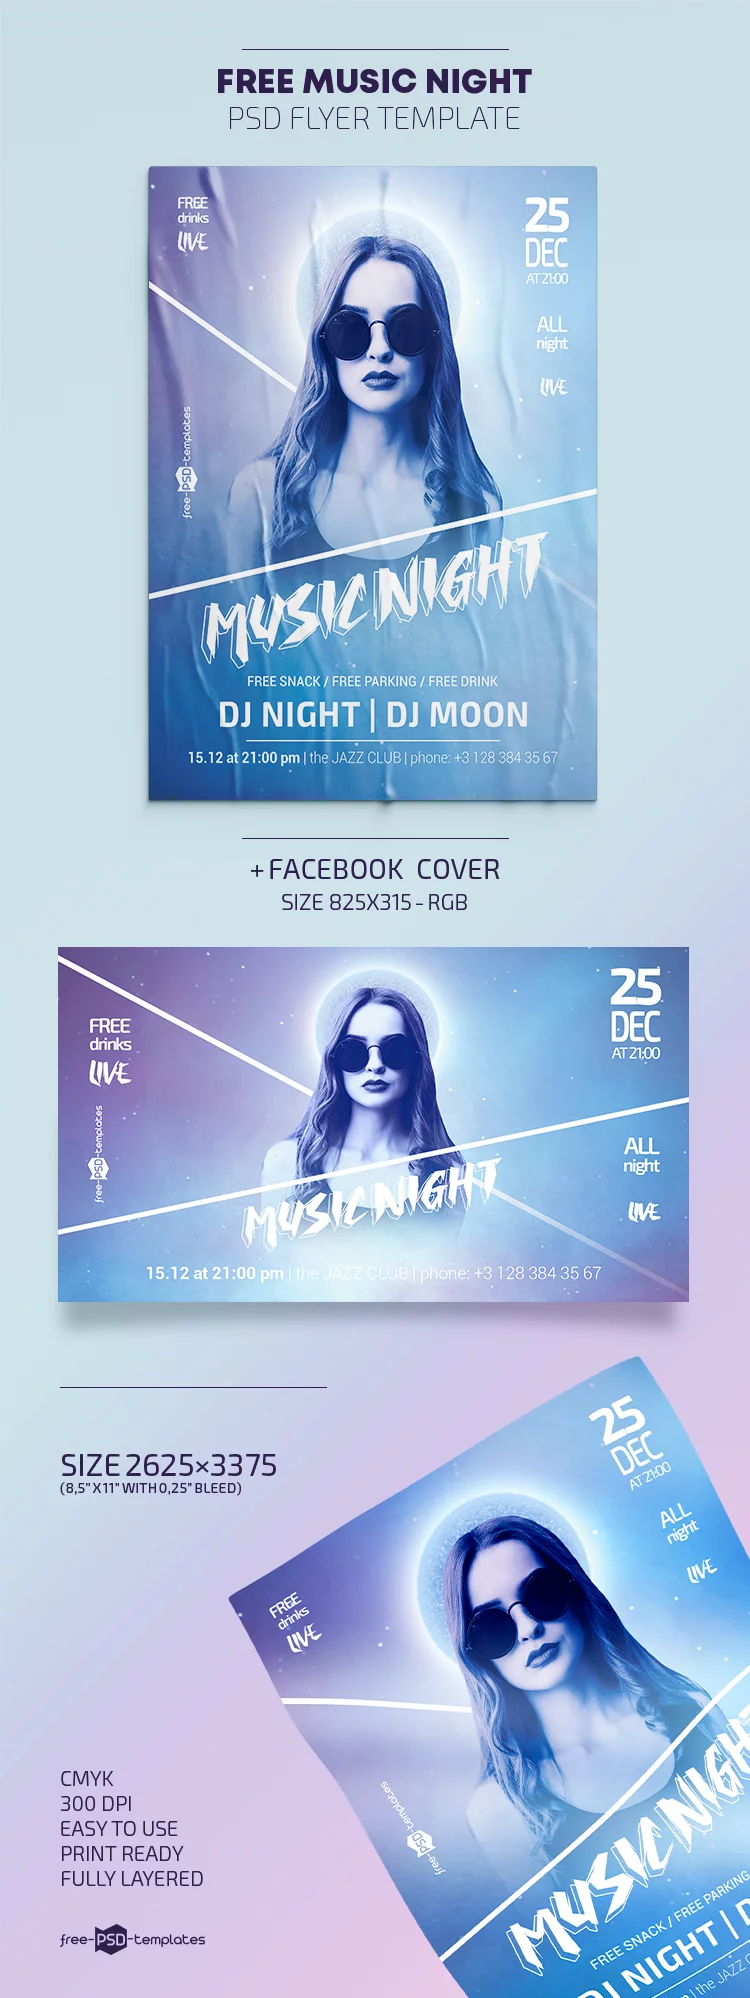 Free Music Night Flyer Template in PSD